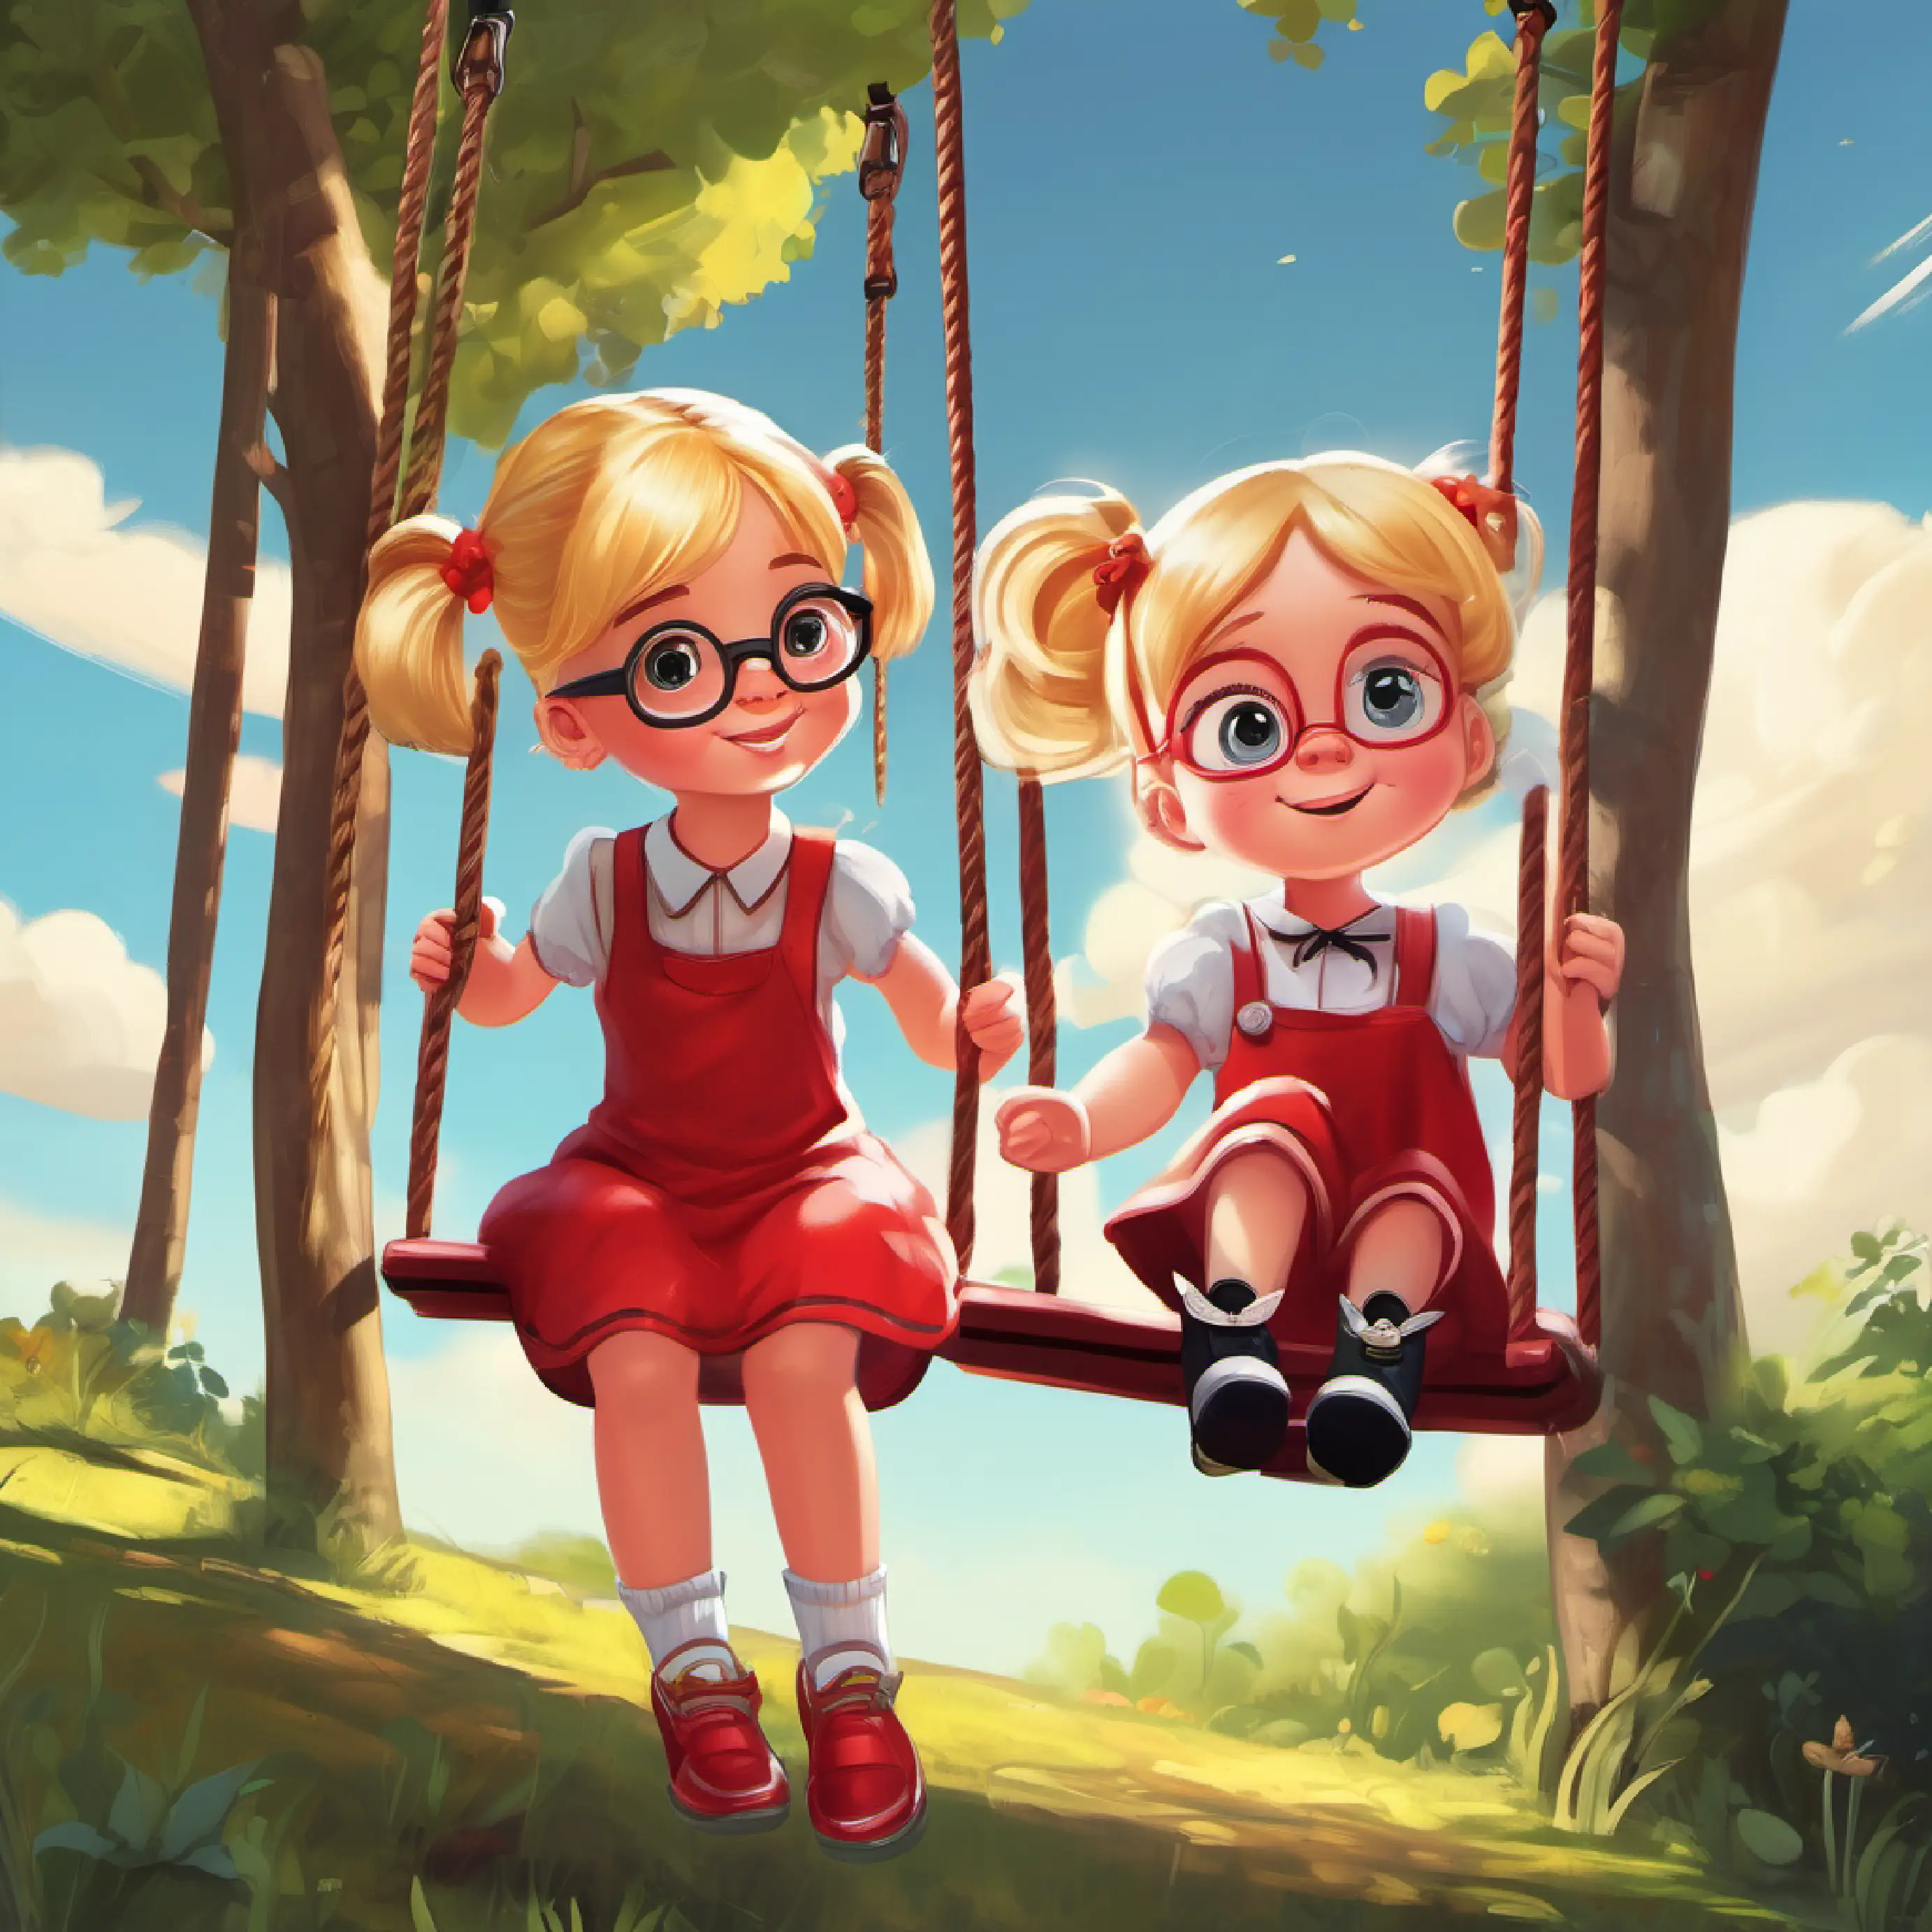 Sally approaches a happy girl on a swing and inquires about her joy.